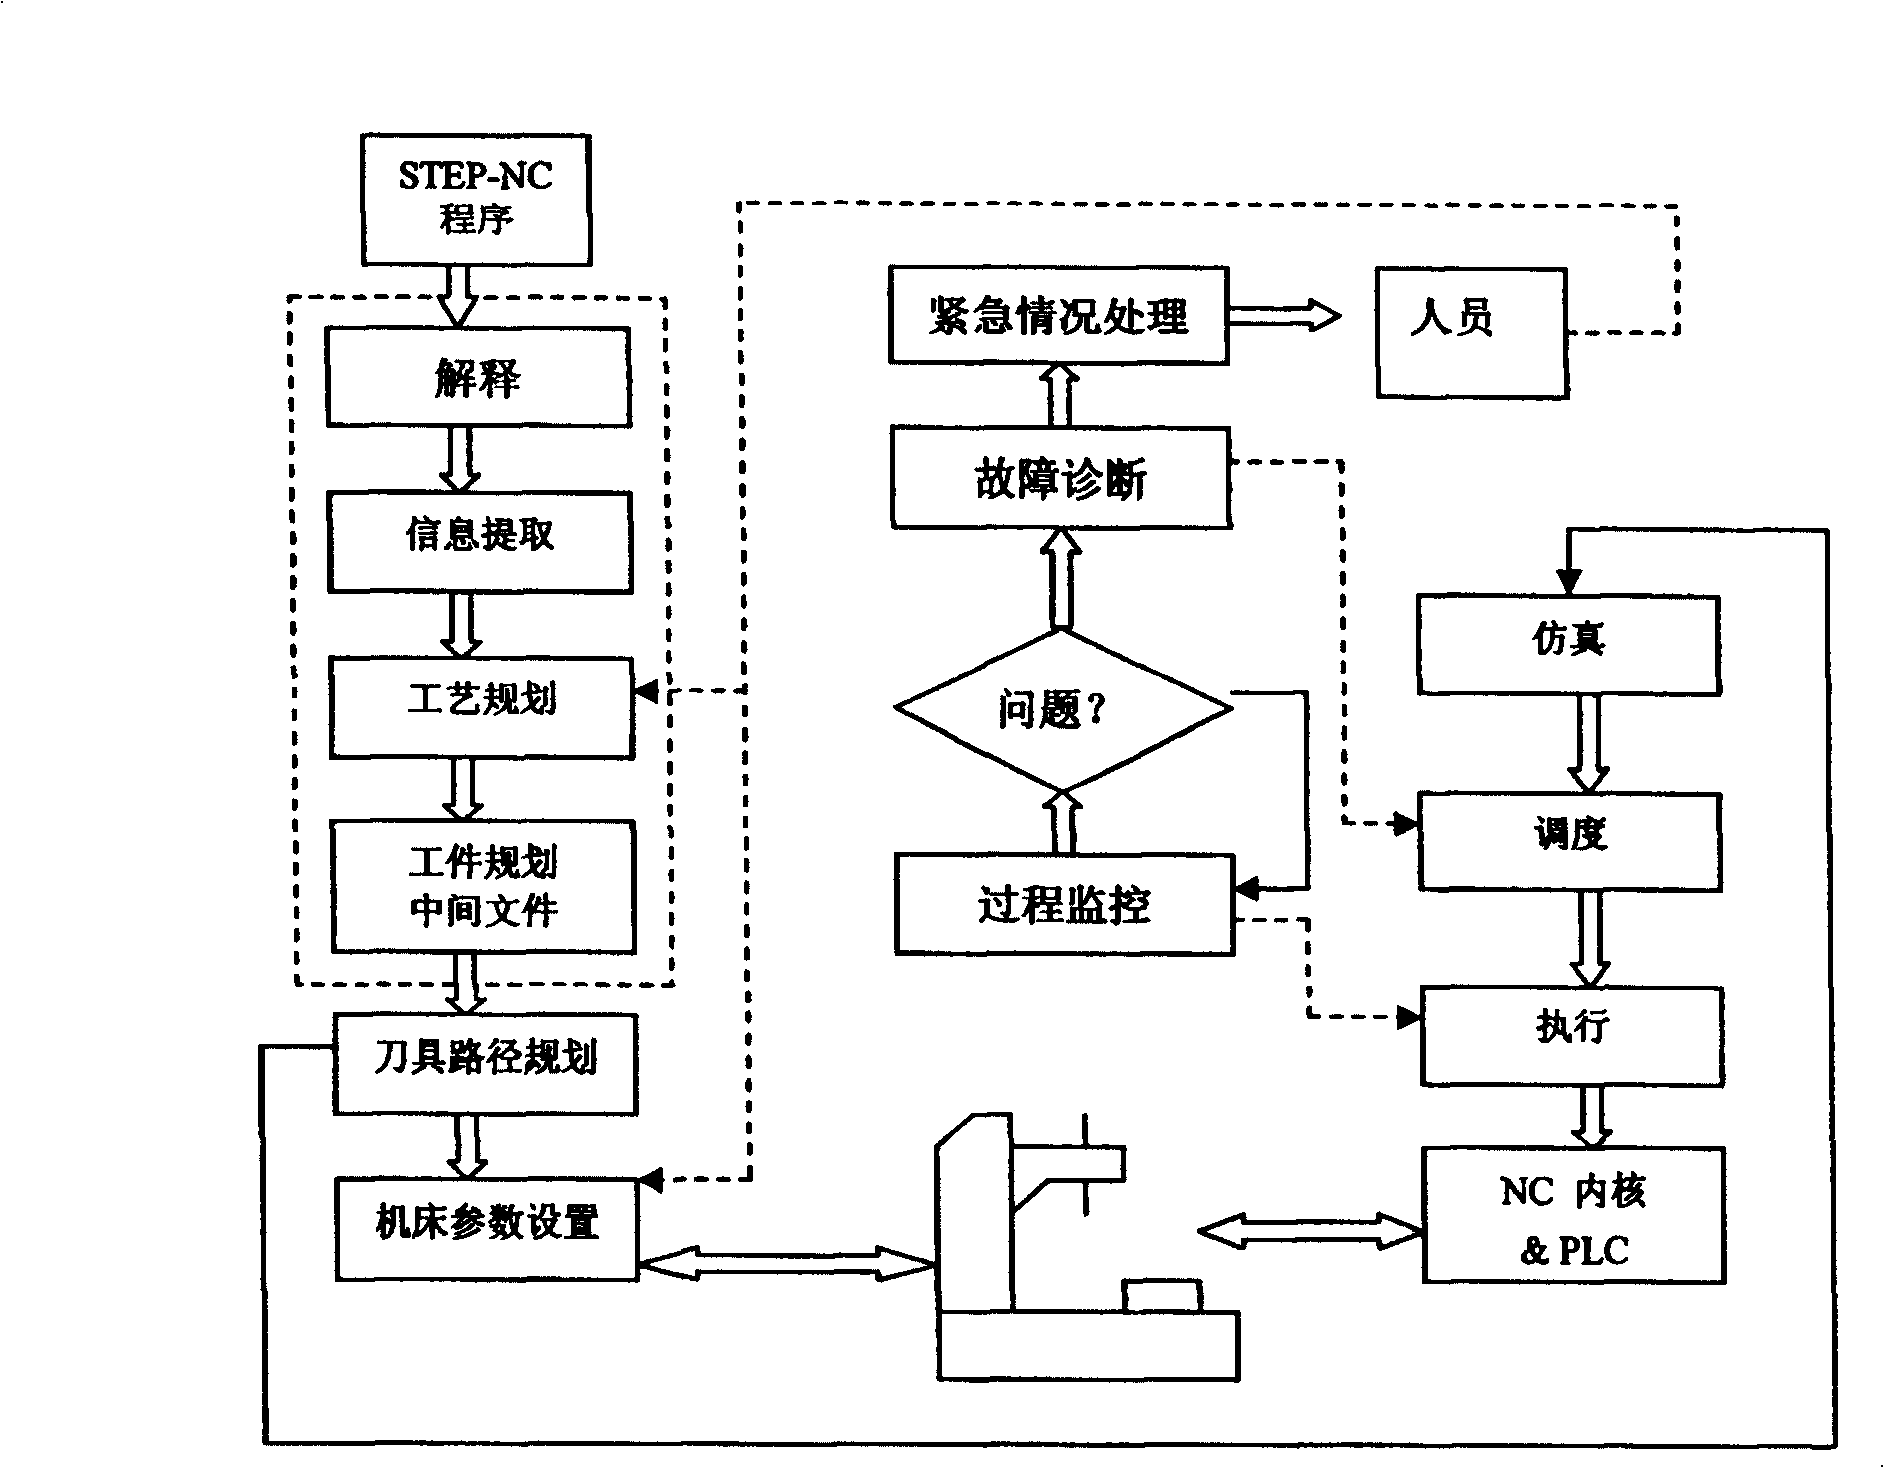 Intelligent STEP-NC controller system and its complementing method